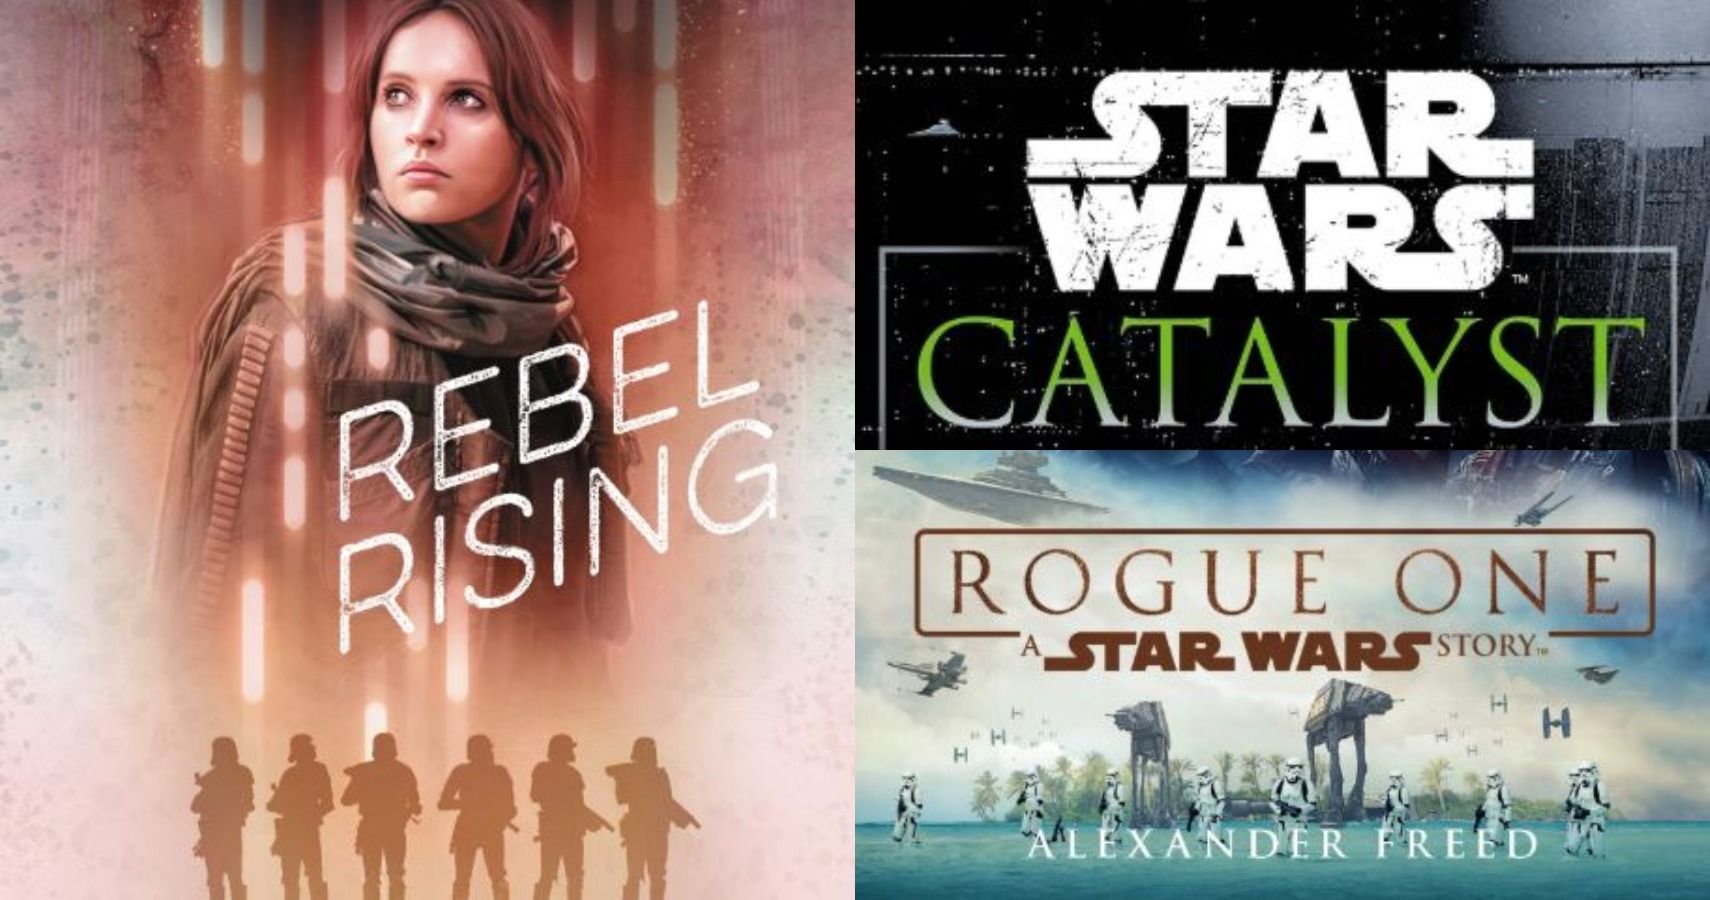 star wars movies rogue one year made